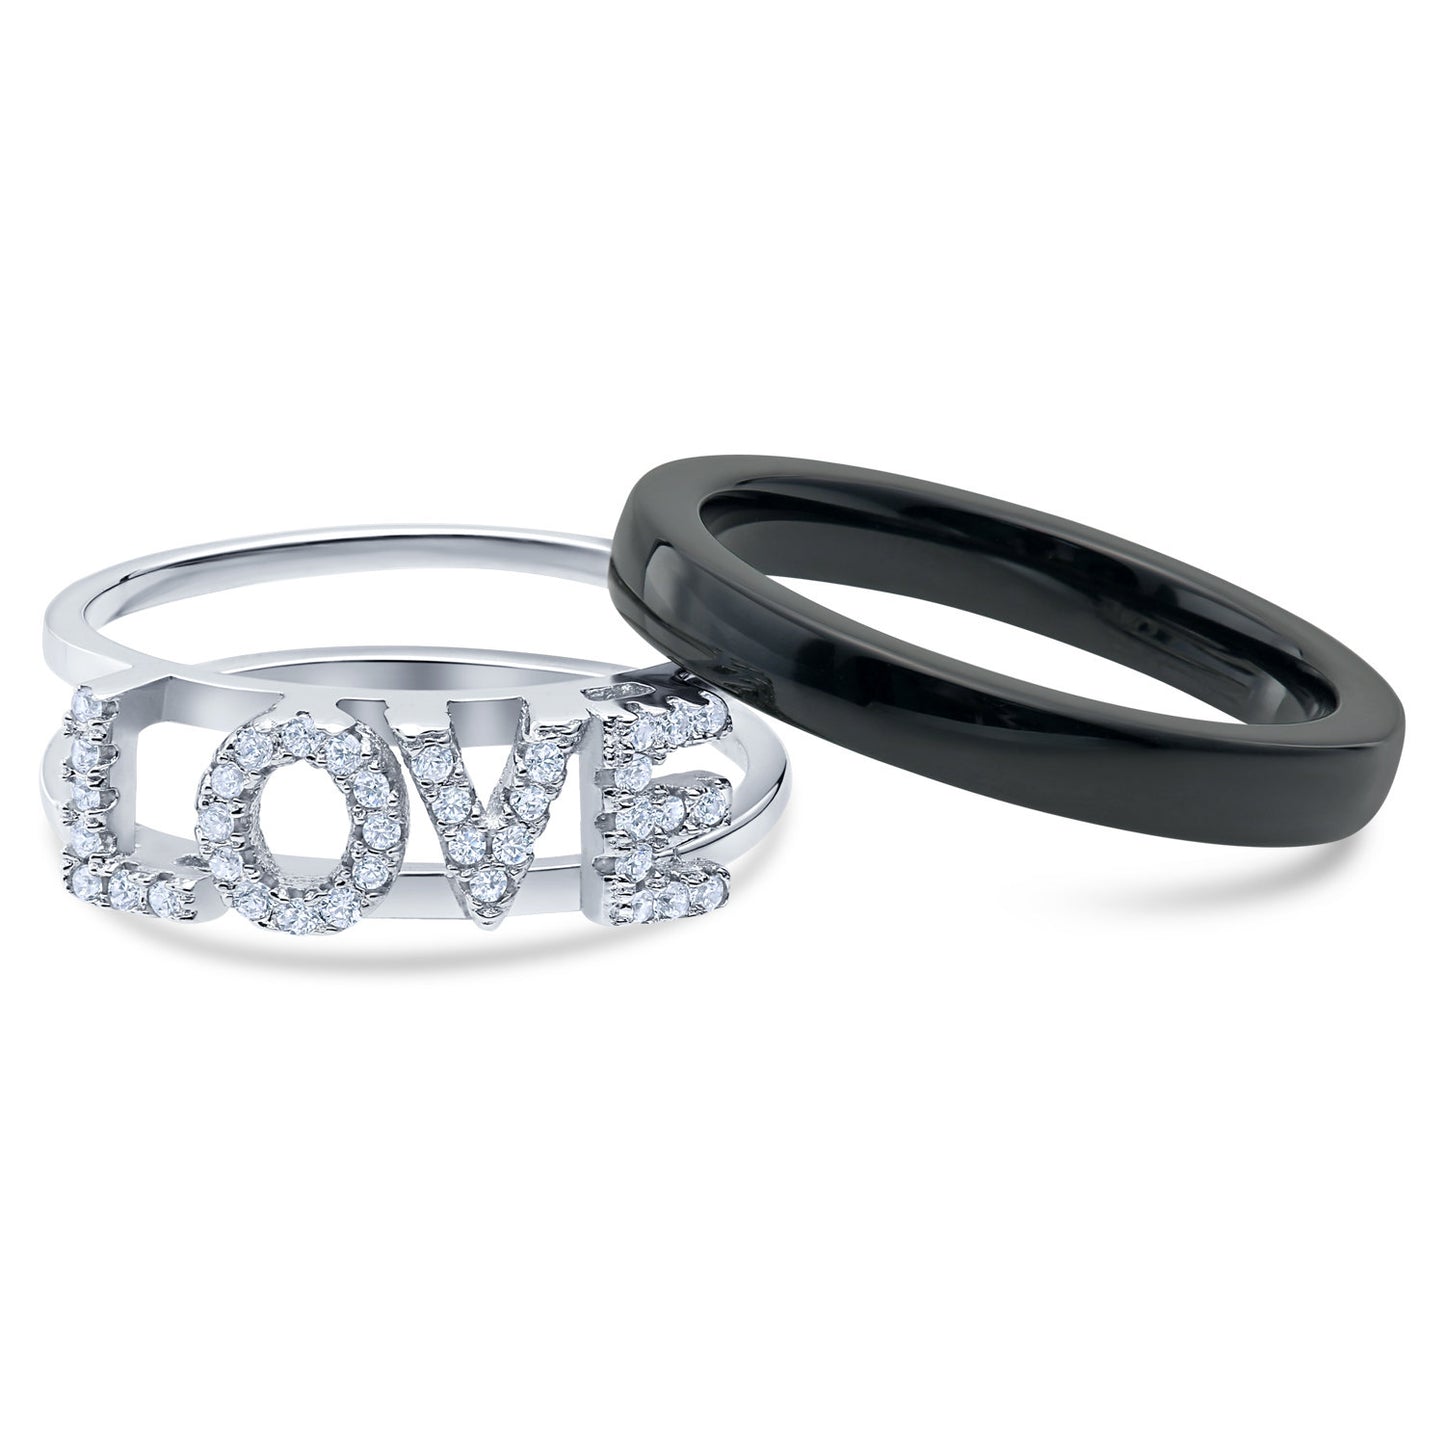 Sterling Silver Double LOVE Ring, 2 Rings in 1